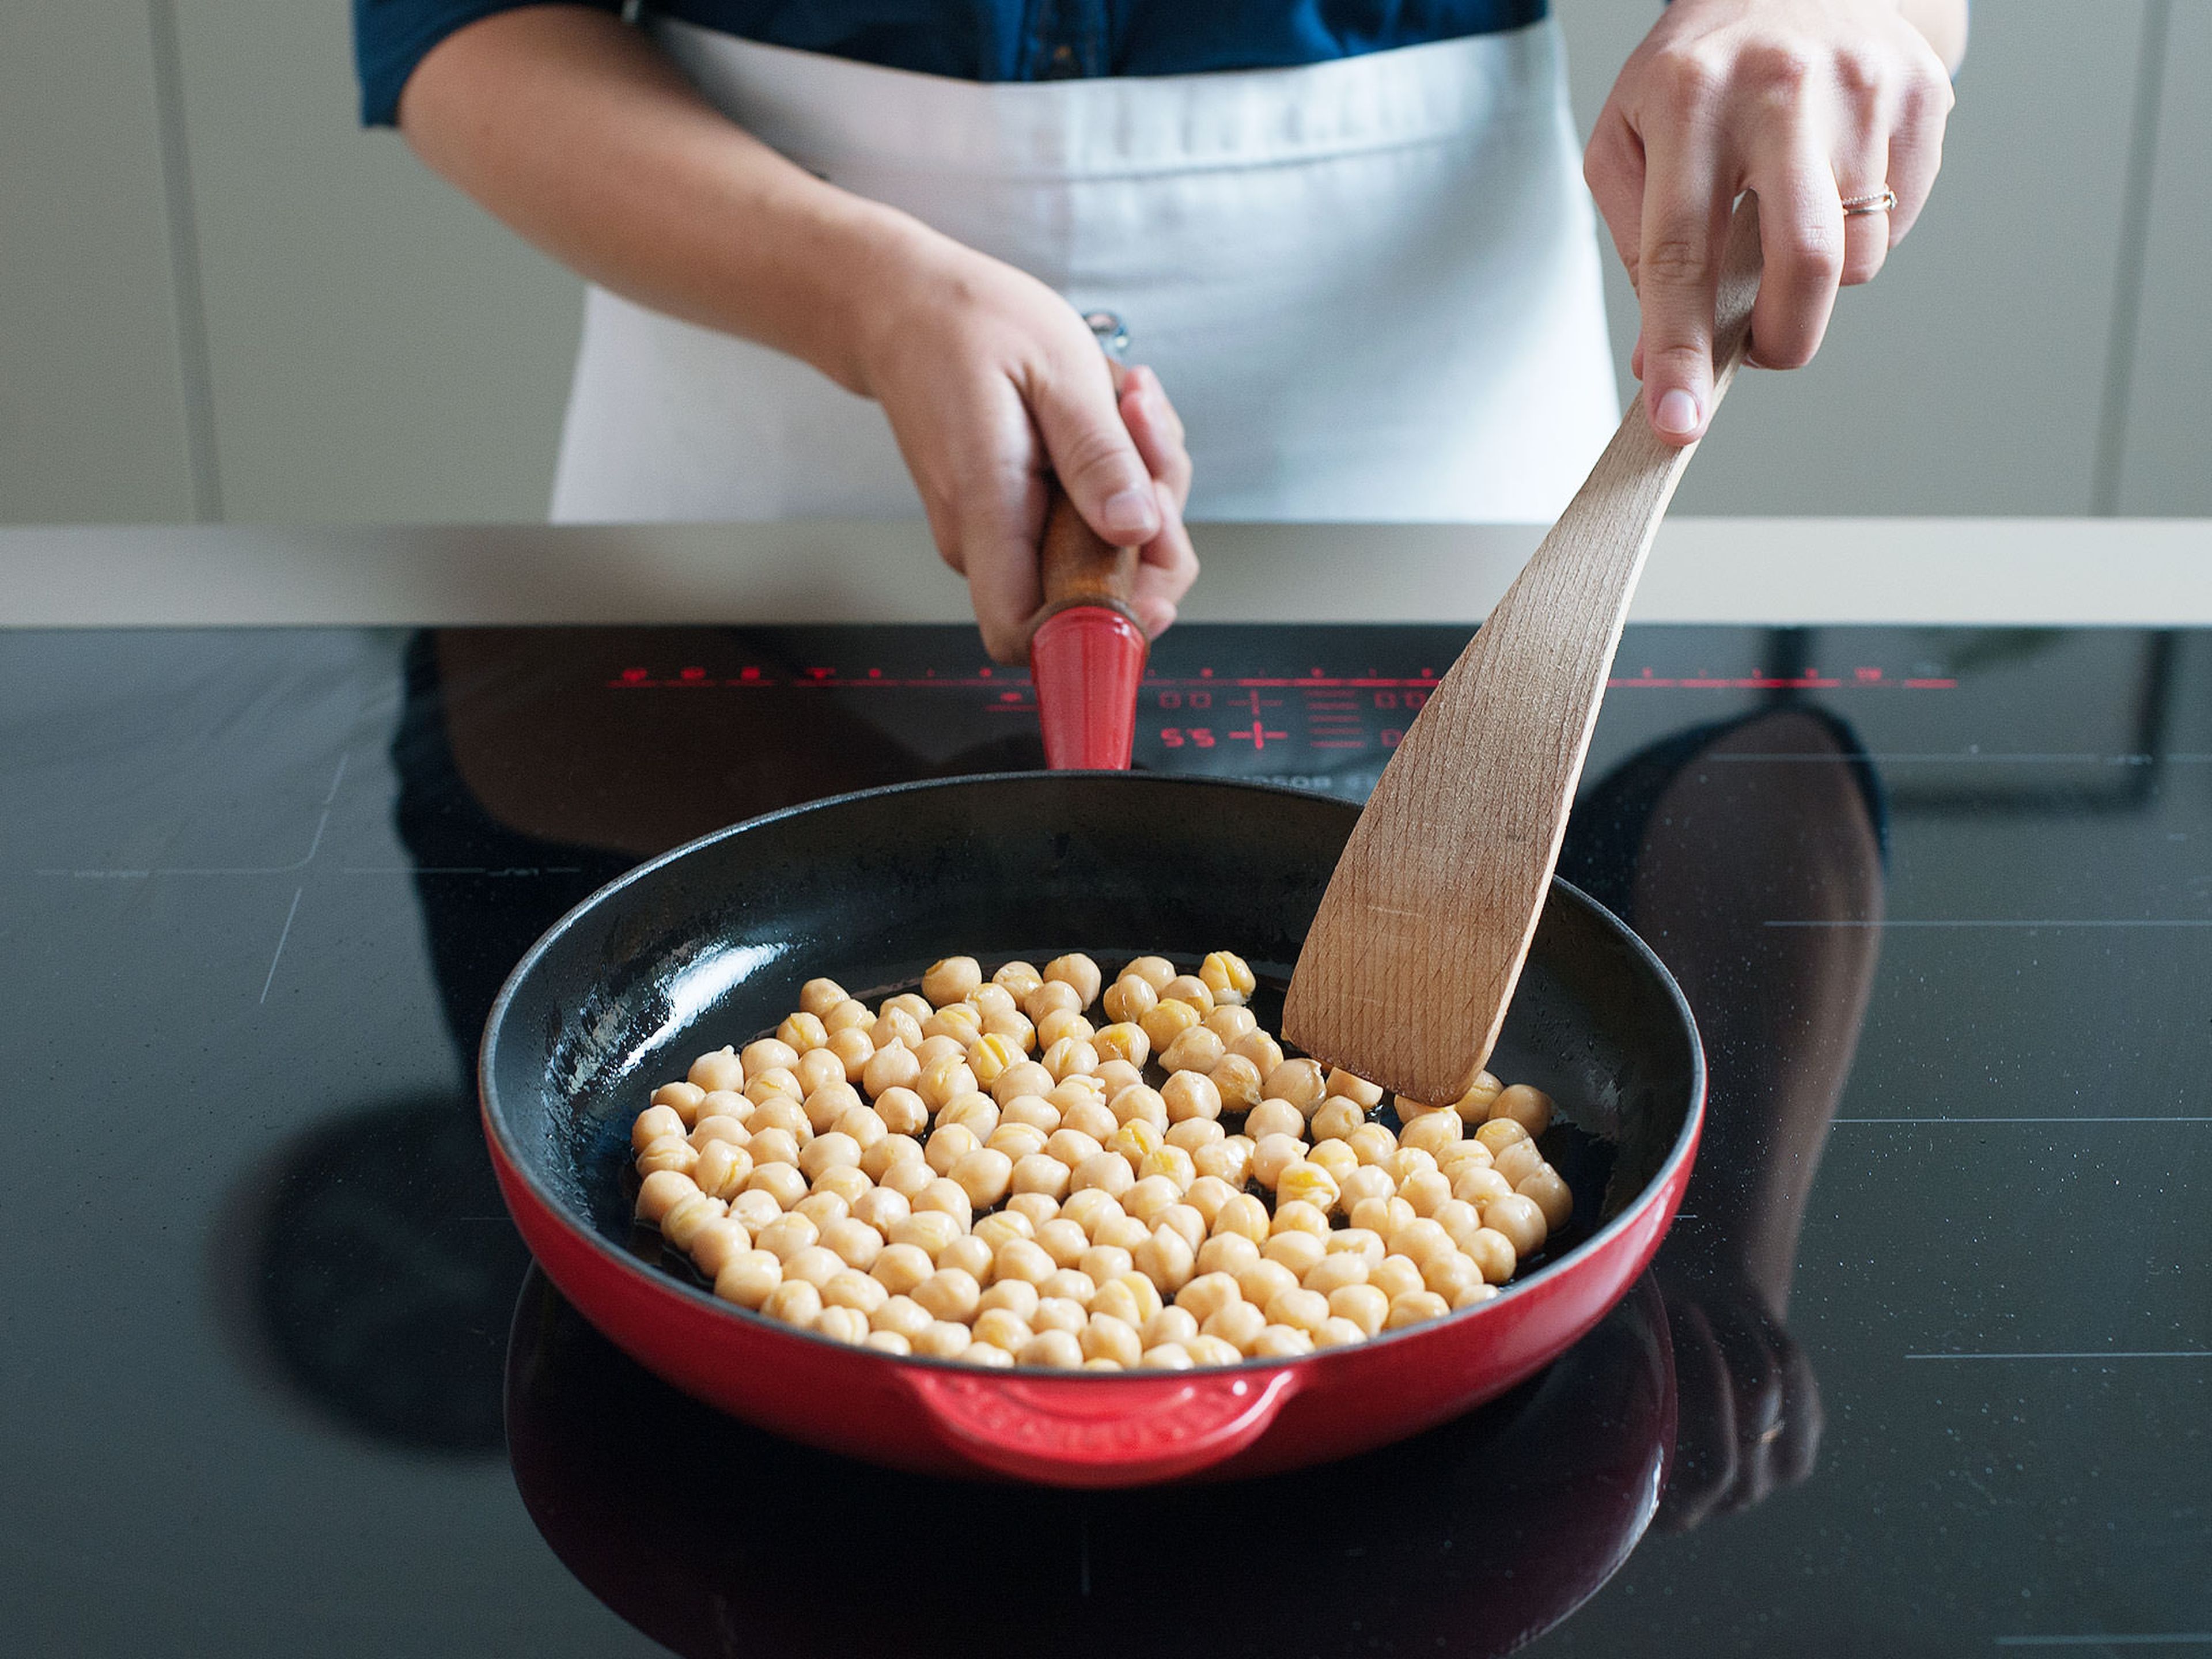 Heat some olive oil in a large skillet over medium-high heat. Add drained chickpeas and fry until golden and crisp, approx. 15 min. Transfer to a paper towel-lined plate to drain.